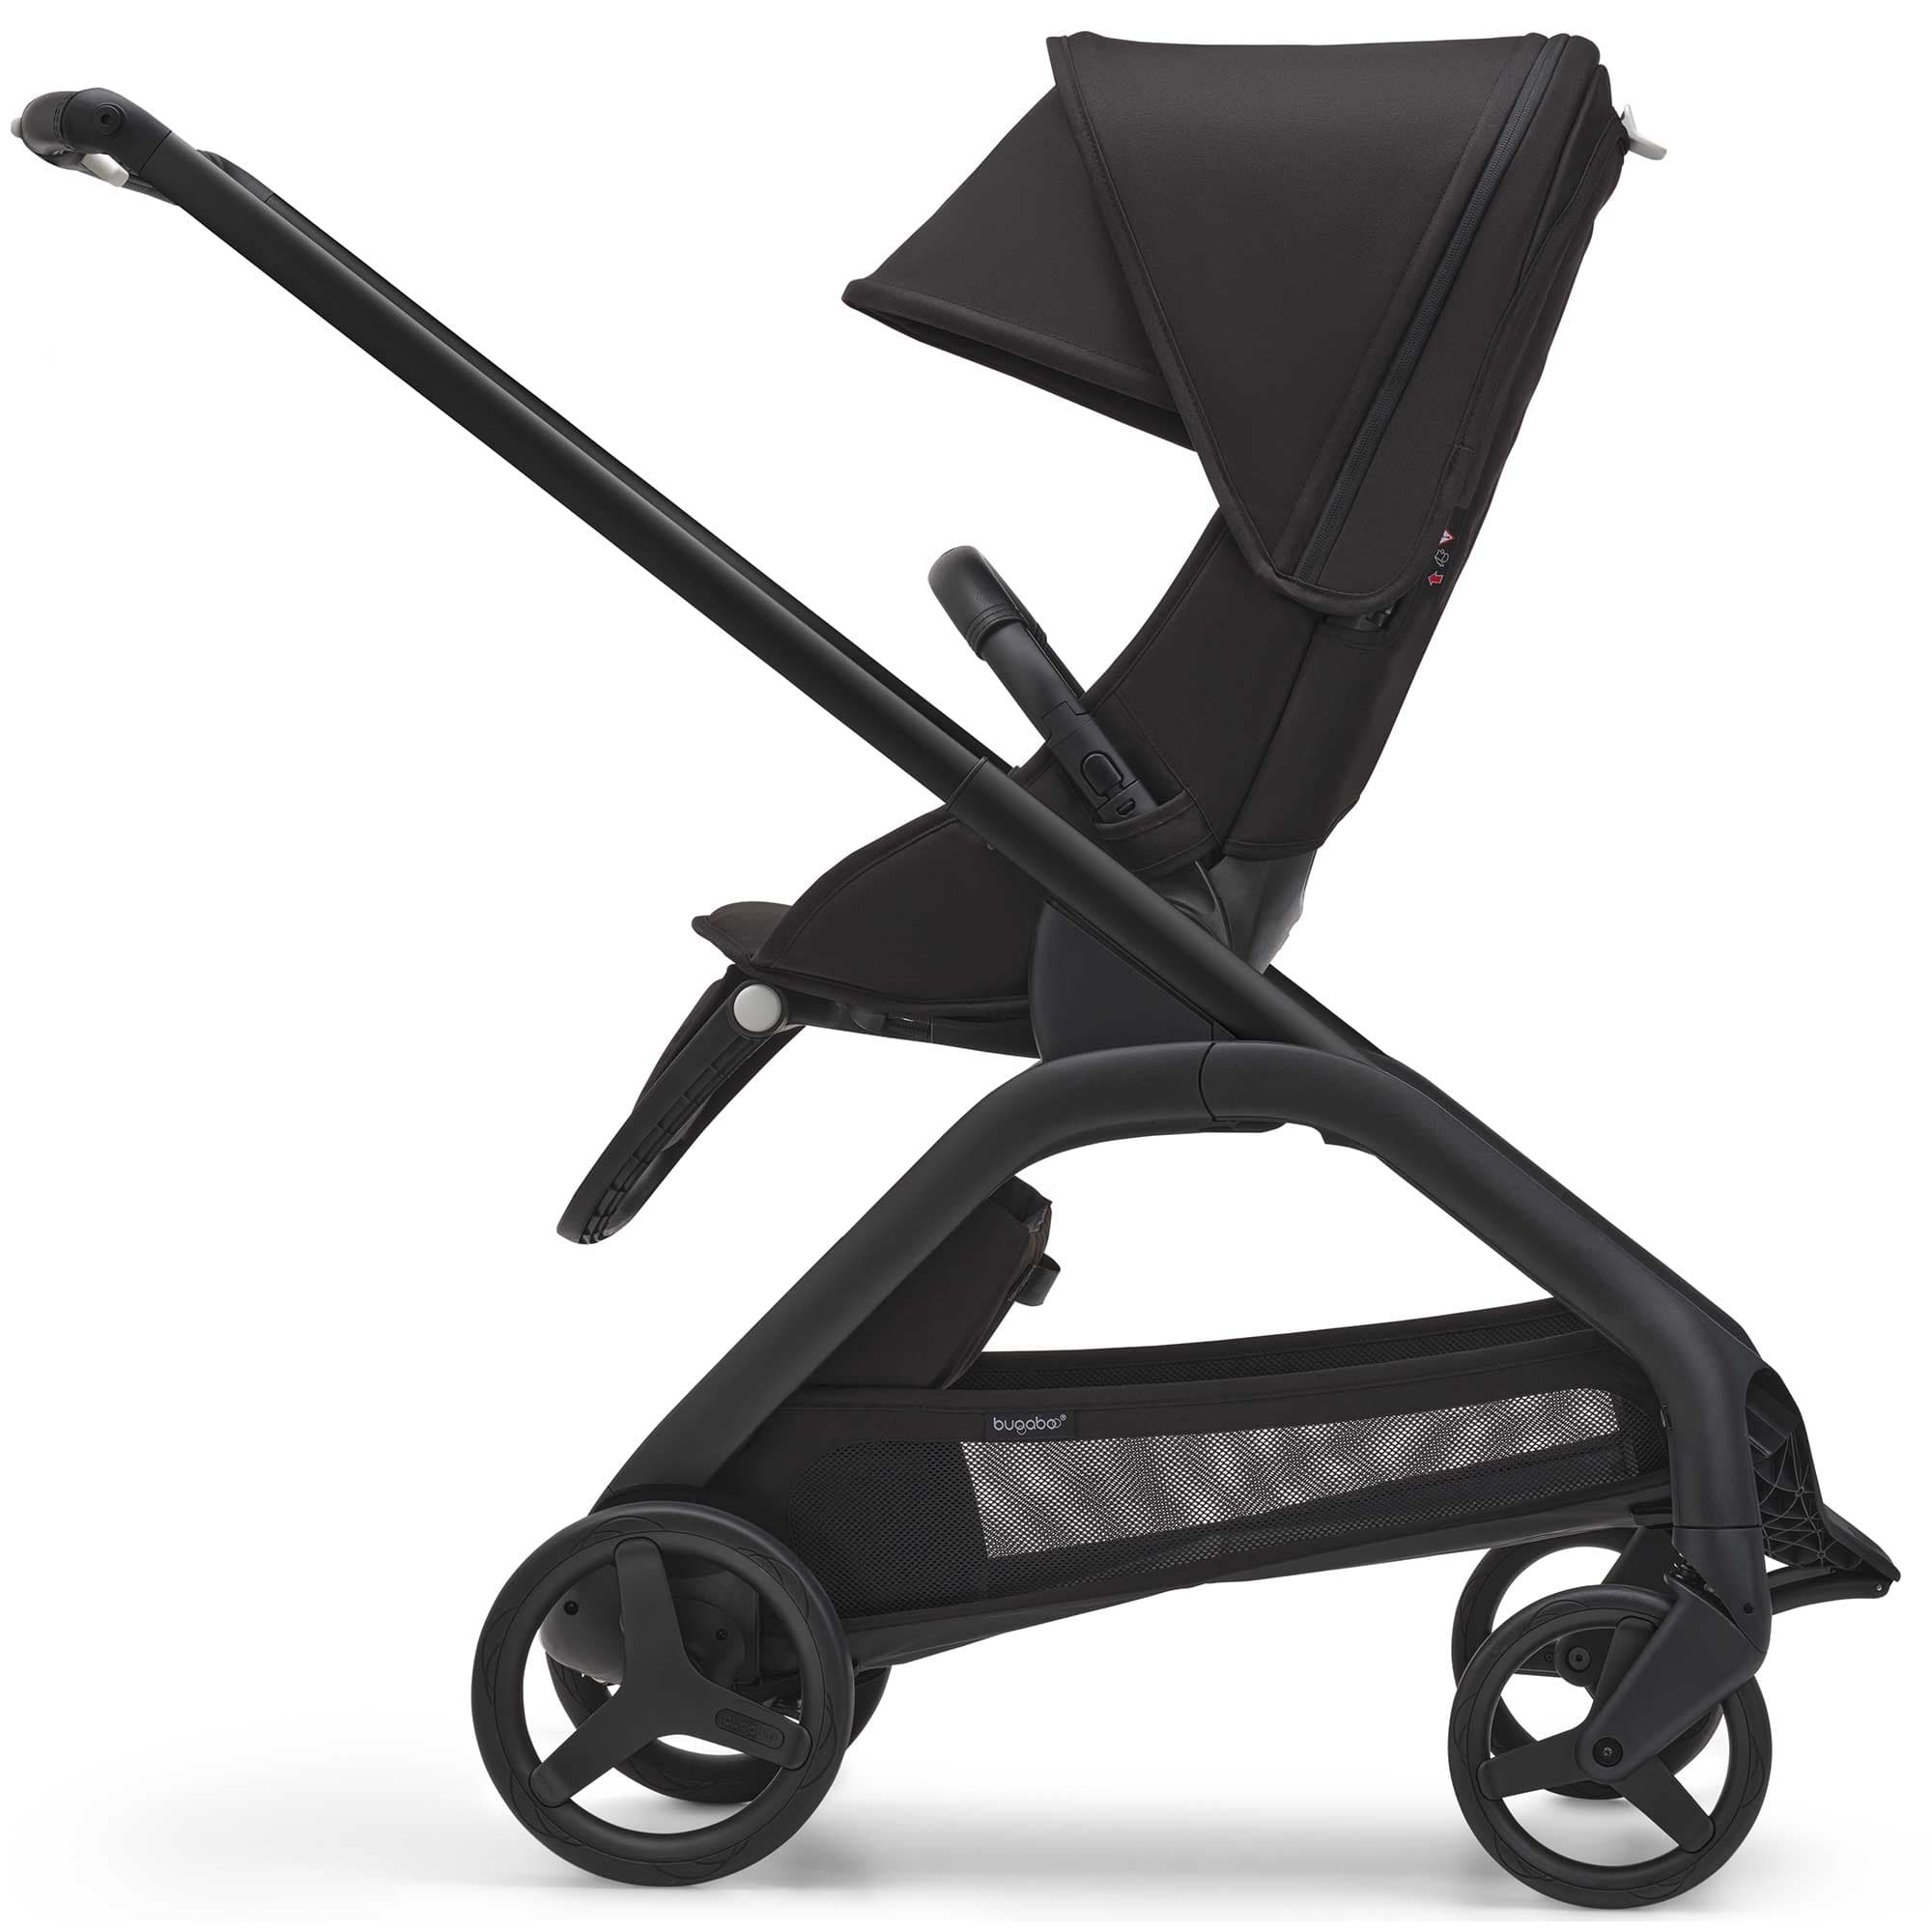 Bugaboo Travel Systems Bugaboo Dragonfly Ultimate Bundle in Black/Midnight Black 13809-BLK-MID-BLK